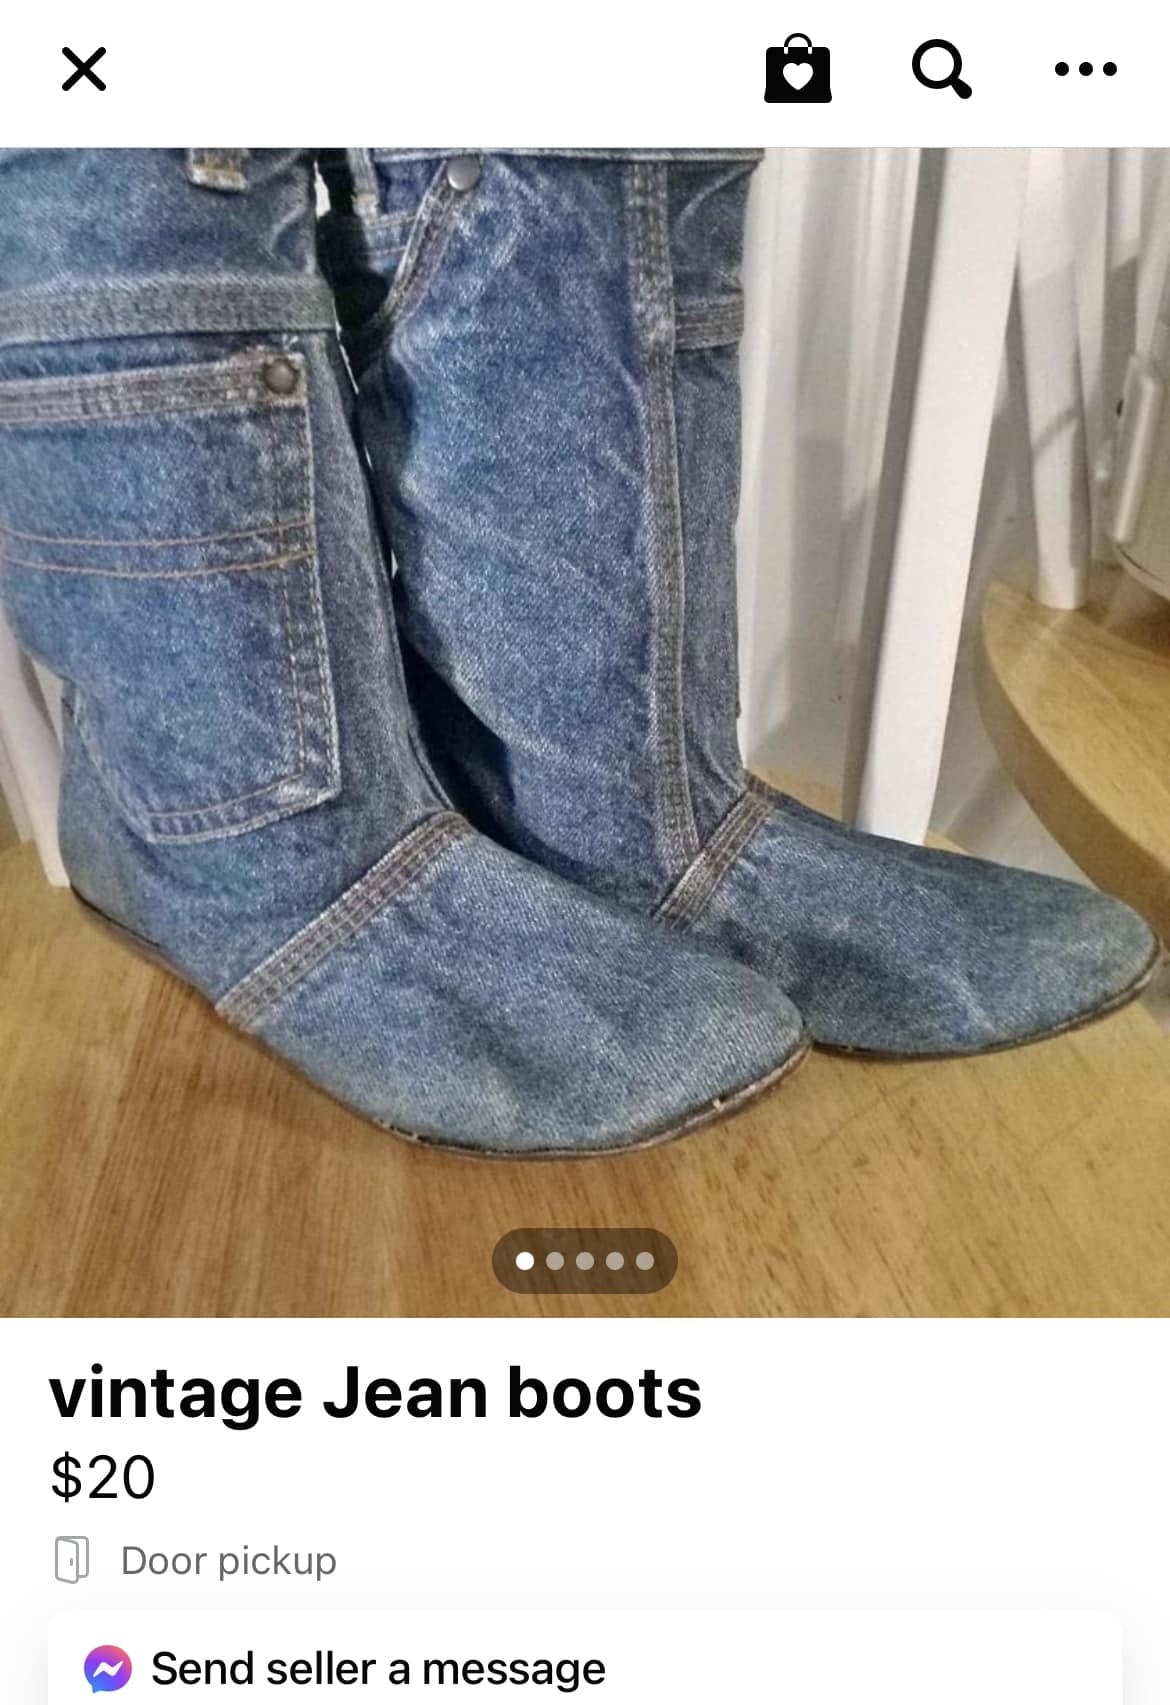 Vintage jean boots for sale for $20